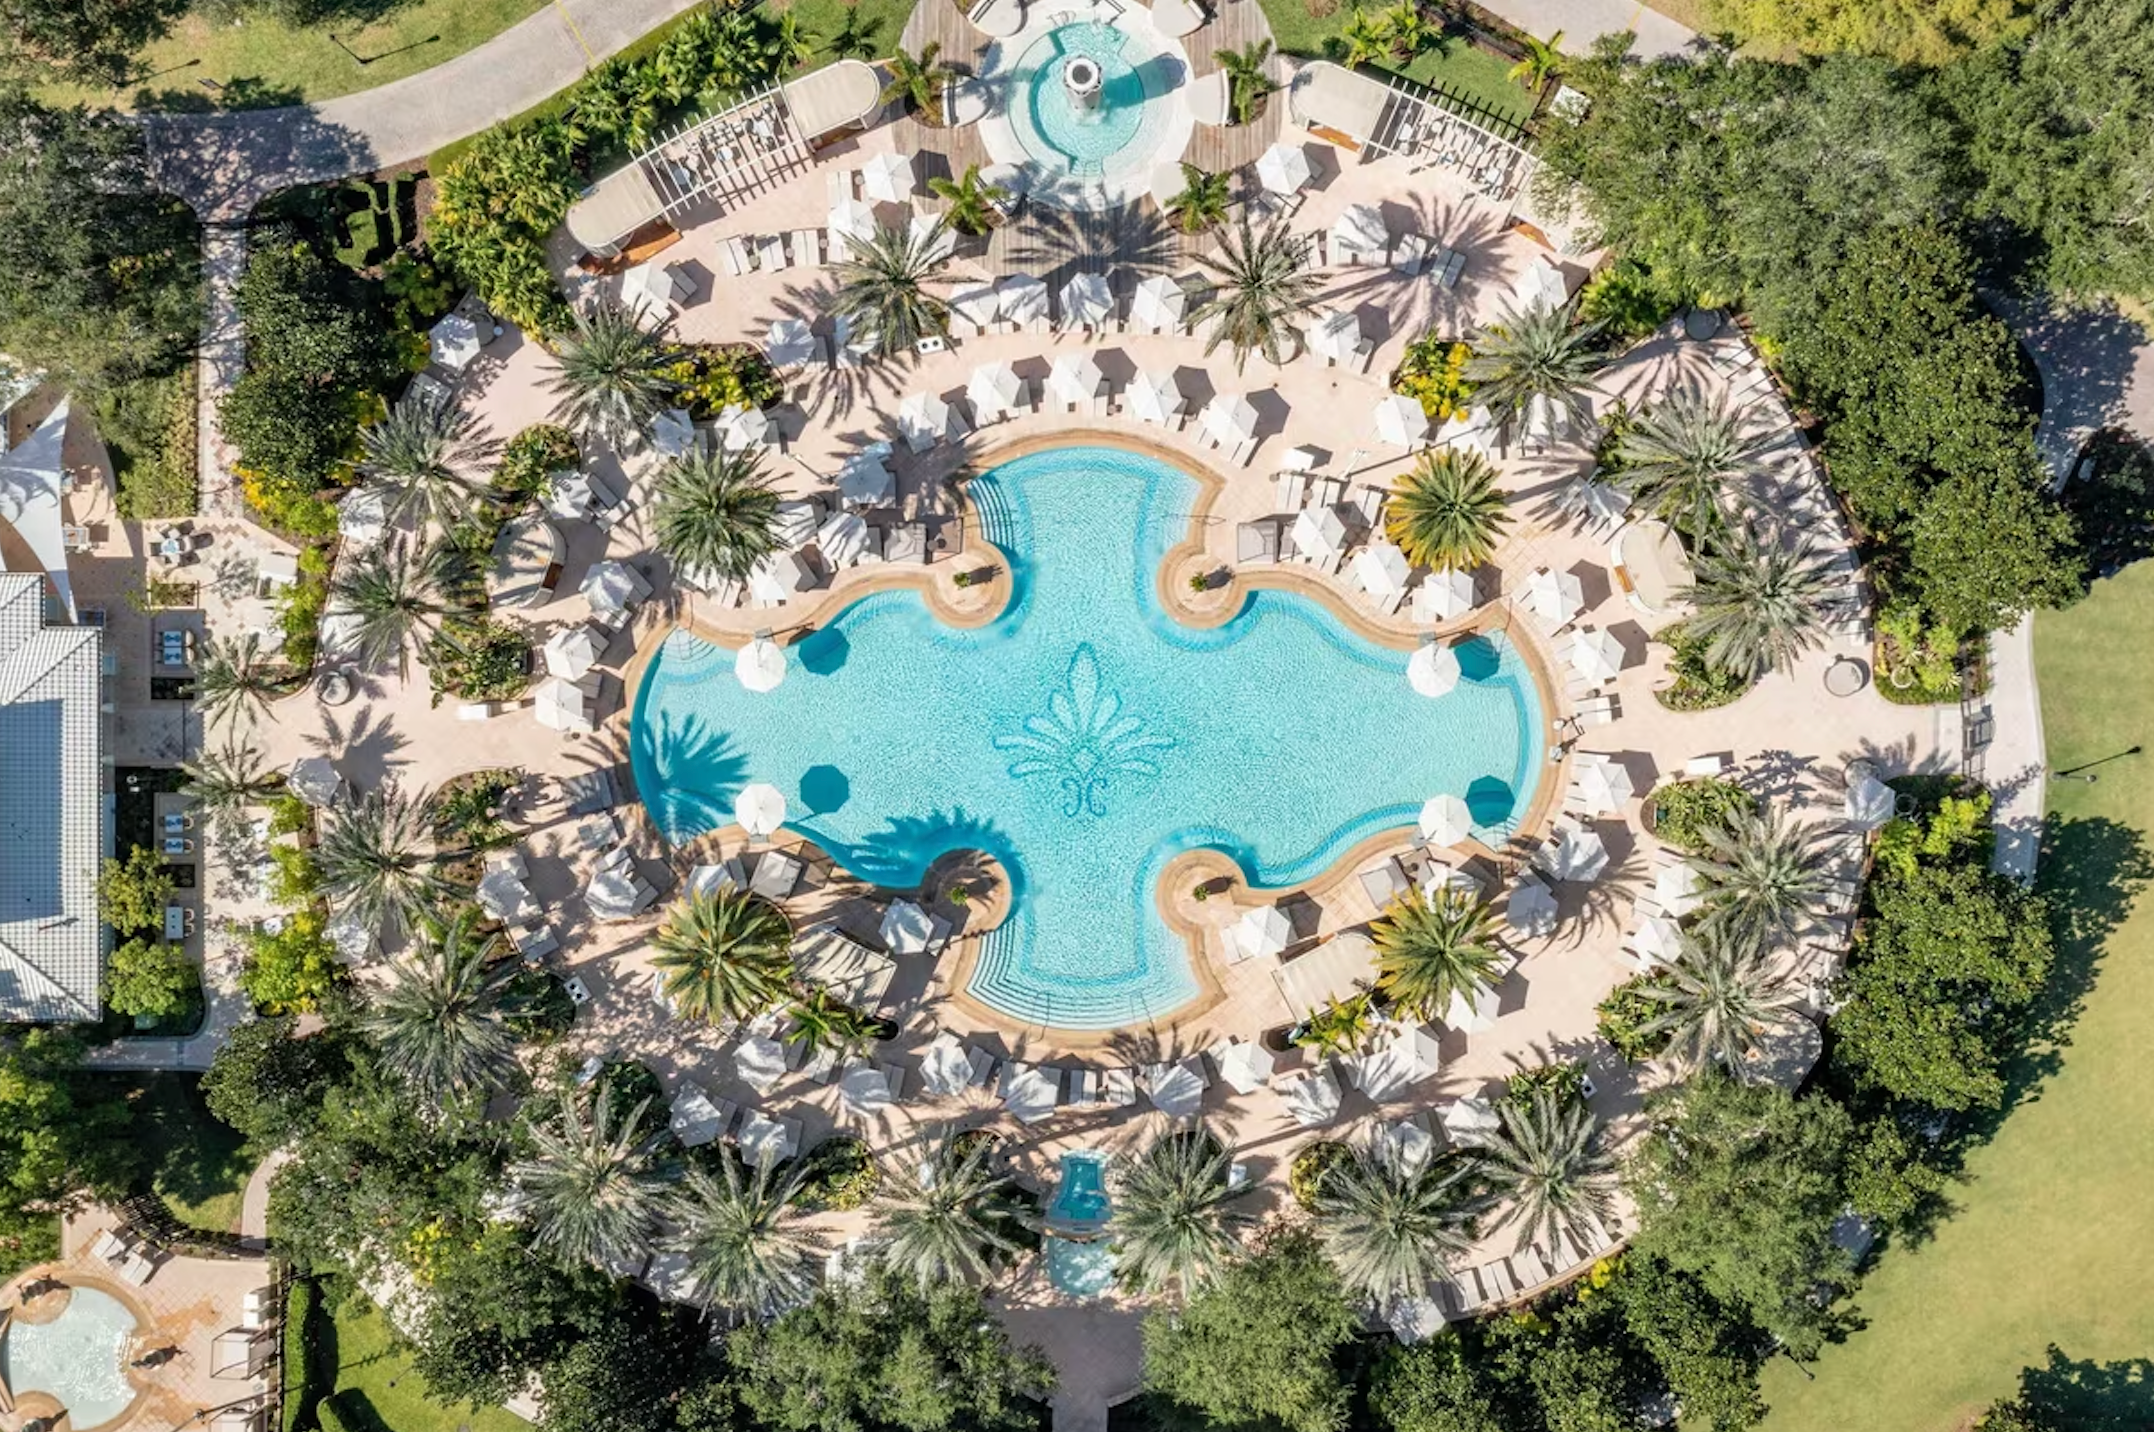 Auction - The Ritz-Carlton Orlando Grande Lakes - 2 Spa Treatments and 2 Nights Stay (Value: $2,500)